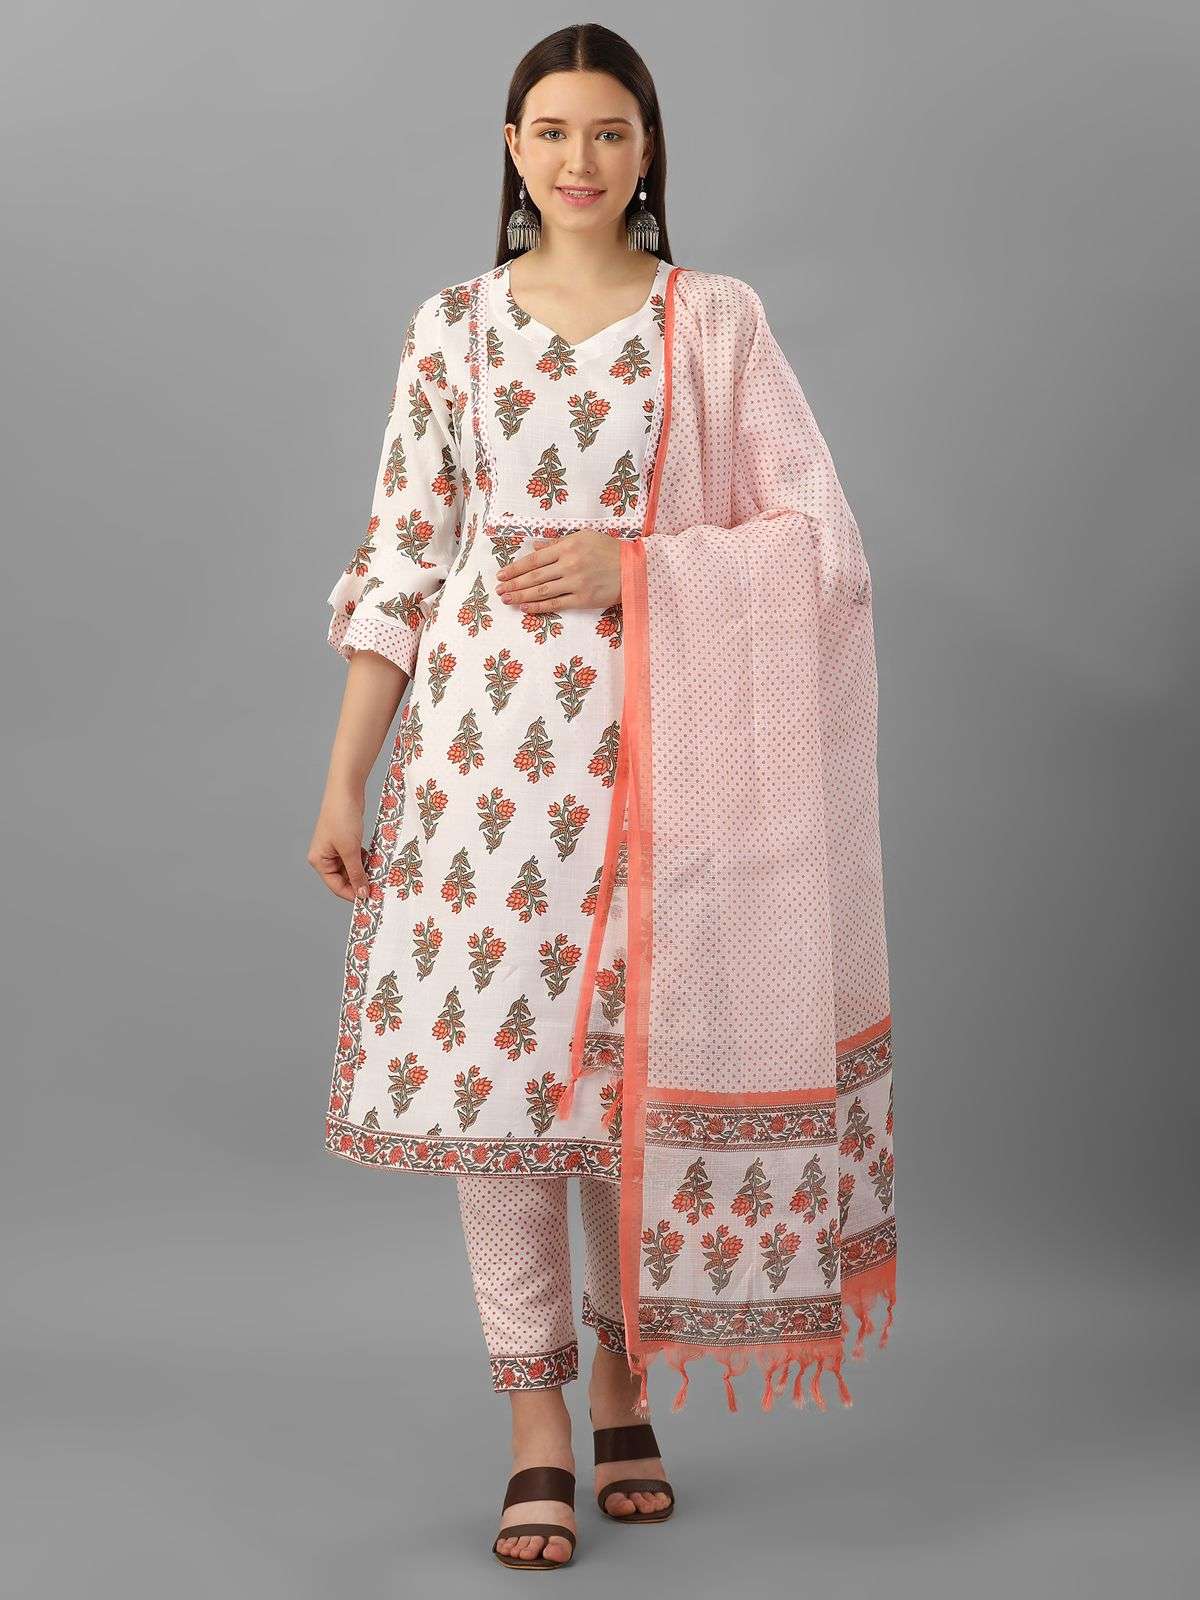 kiara 3 festival wear top duppta and pant set readymade soft cotton fabric kurtie with pant and duppta summer readymade cotton suits collection in affordable price